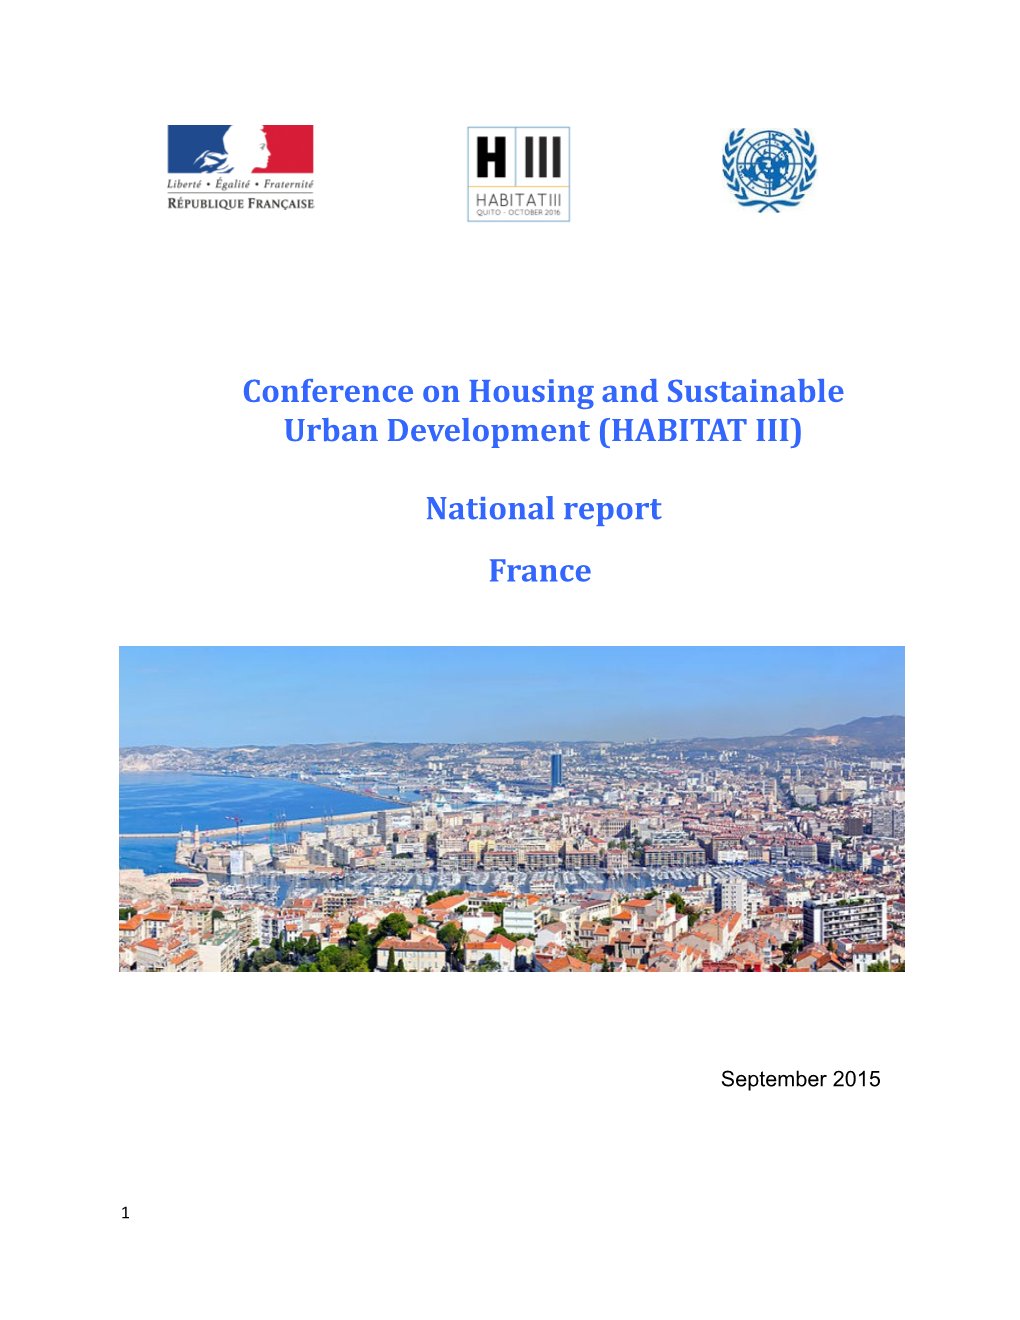 Conference on Housing and Sustainable Urban Development (HABITAT III) National Report France